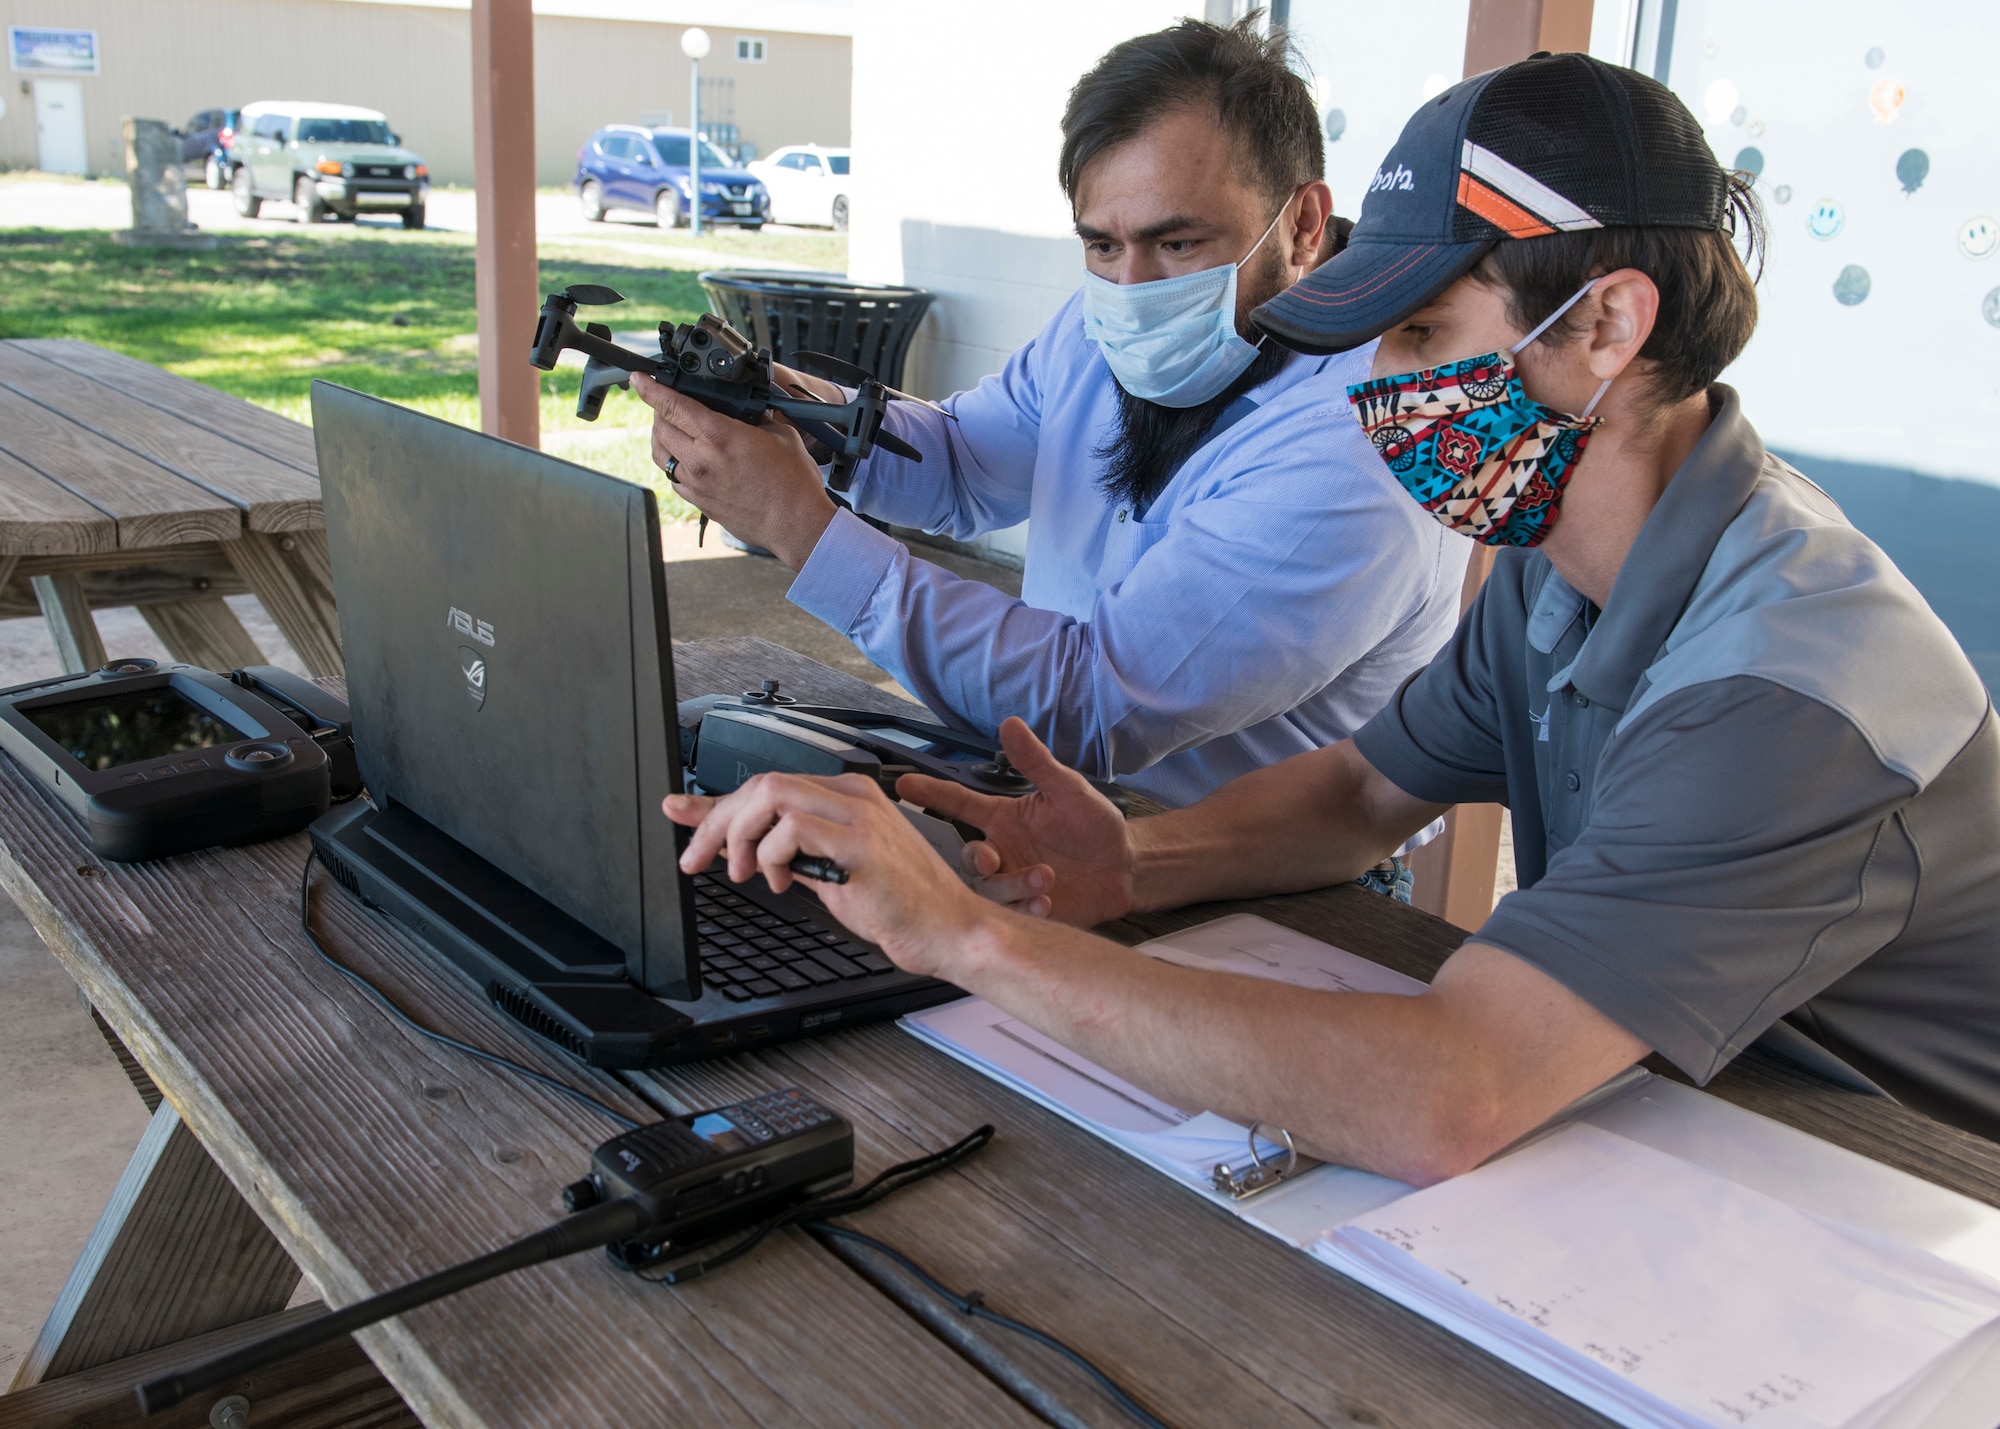 Julio Toala, Air Force Civil Engineer Center GeoBase program geospatial operations manager, receives training from Joseph Campbell, Emerging Technologies Institute chief technology officer and lead instructor, on drone pre-flight checks at San Geronimo Air Park, Texas, May 7, 2021. The training focused on pre- and post-flight checks, projecting flight patterns and 3D mapping using images from the drone. The Air Force GeoBase mission is to create and exploit geospatial information and services to optimize agile combat support and minimize operational risk.